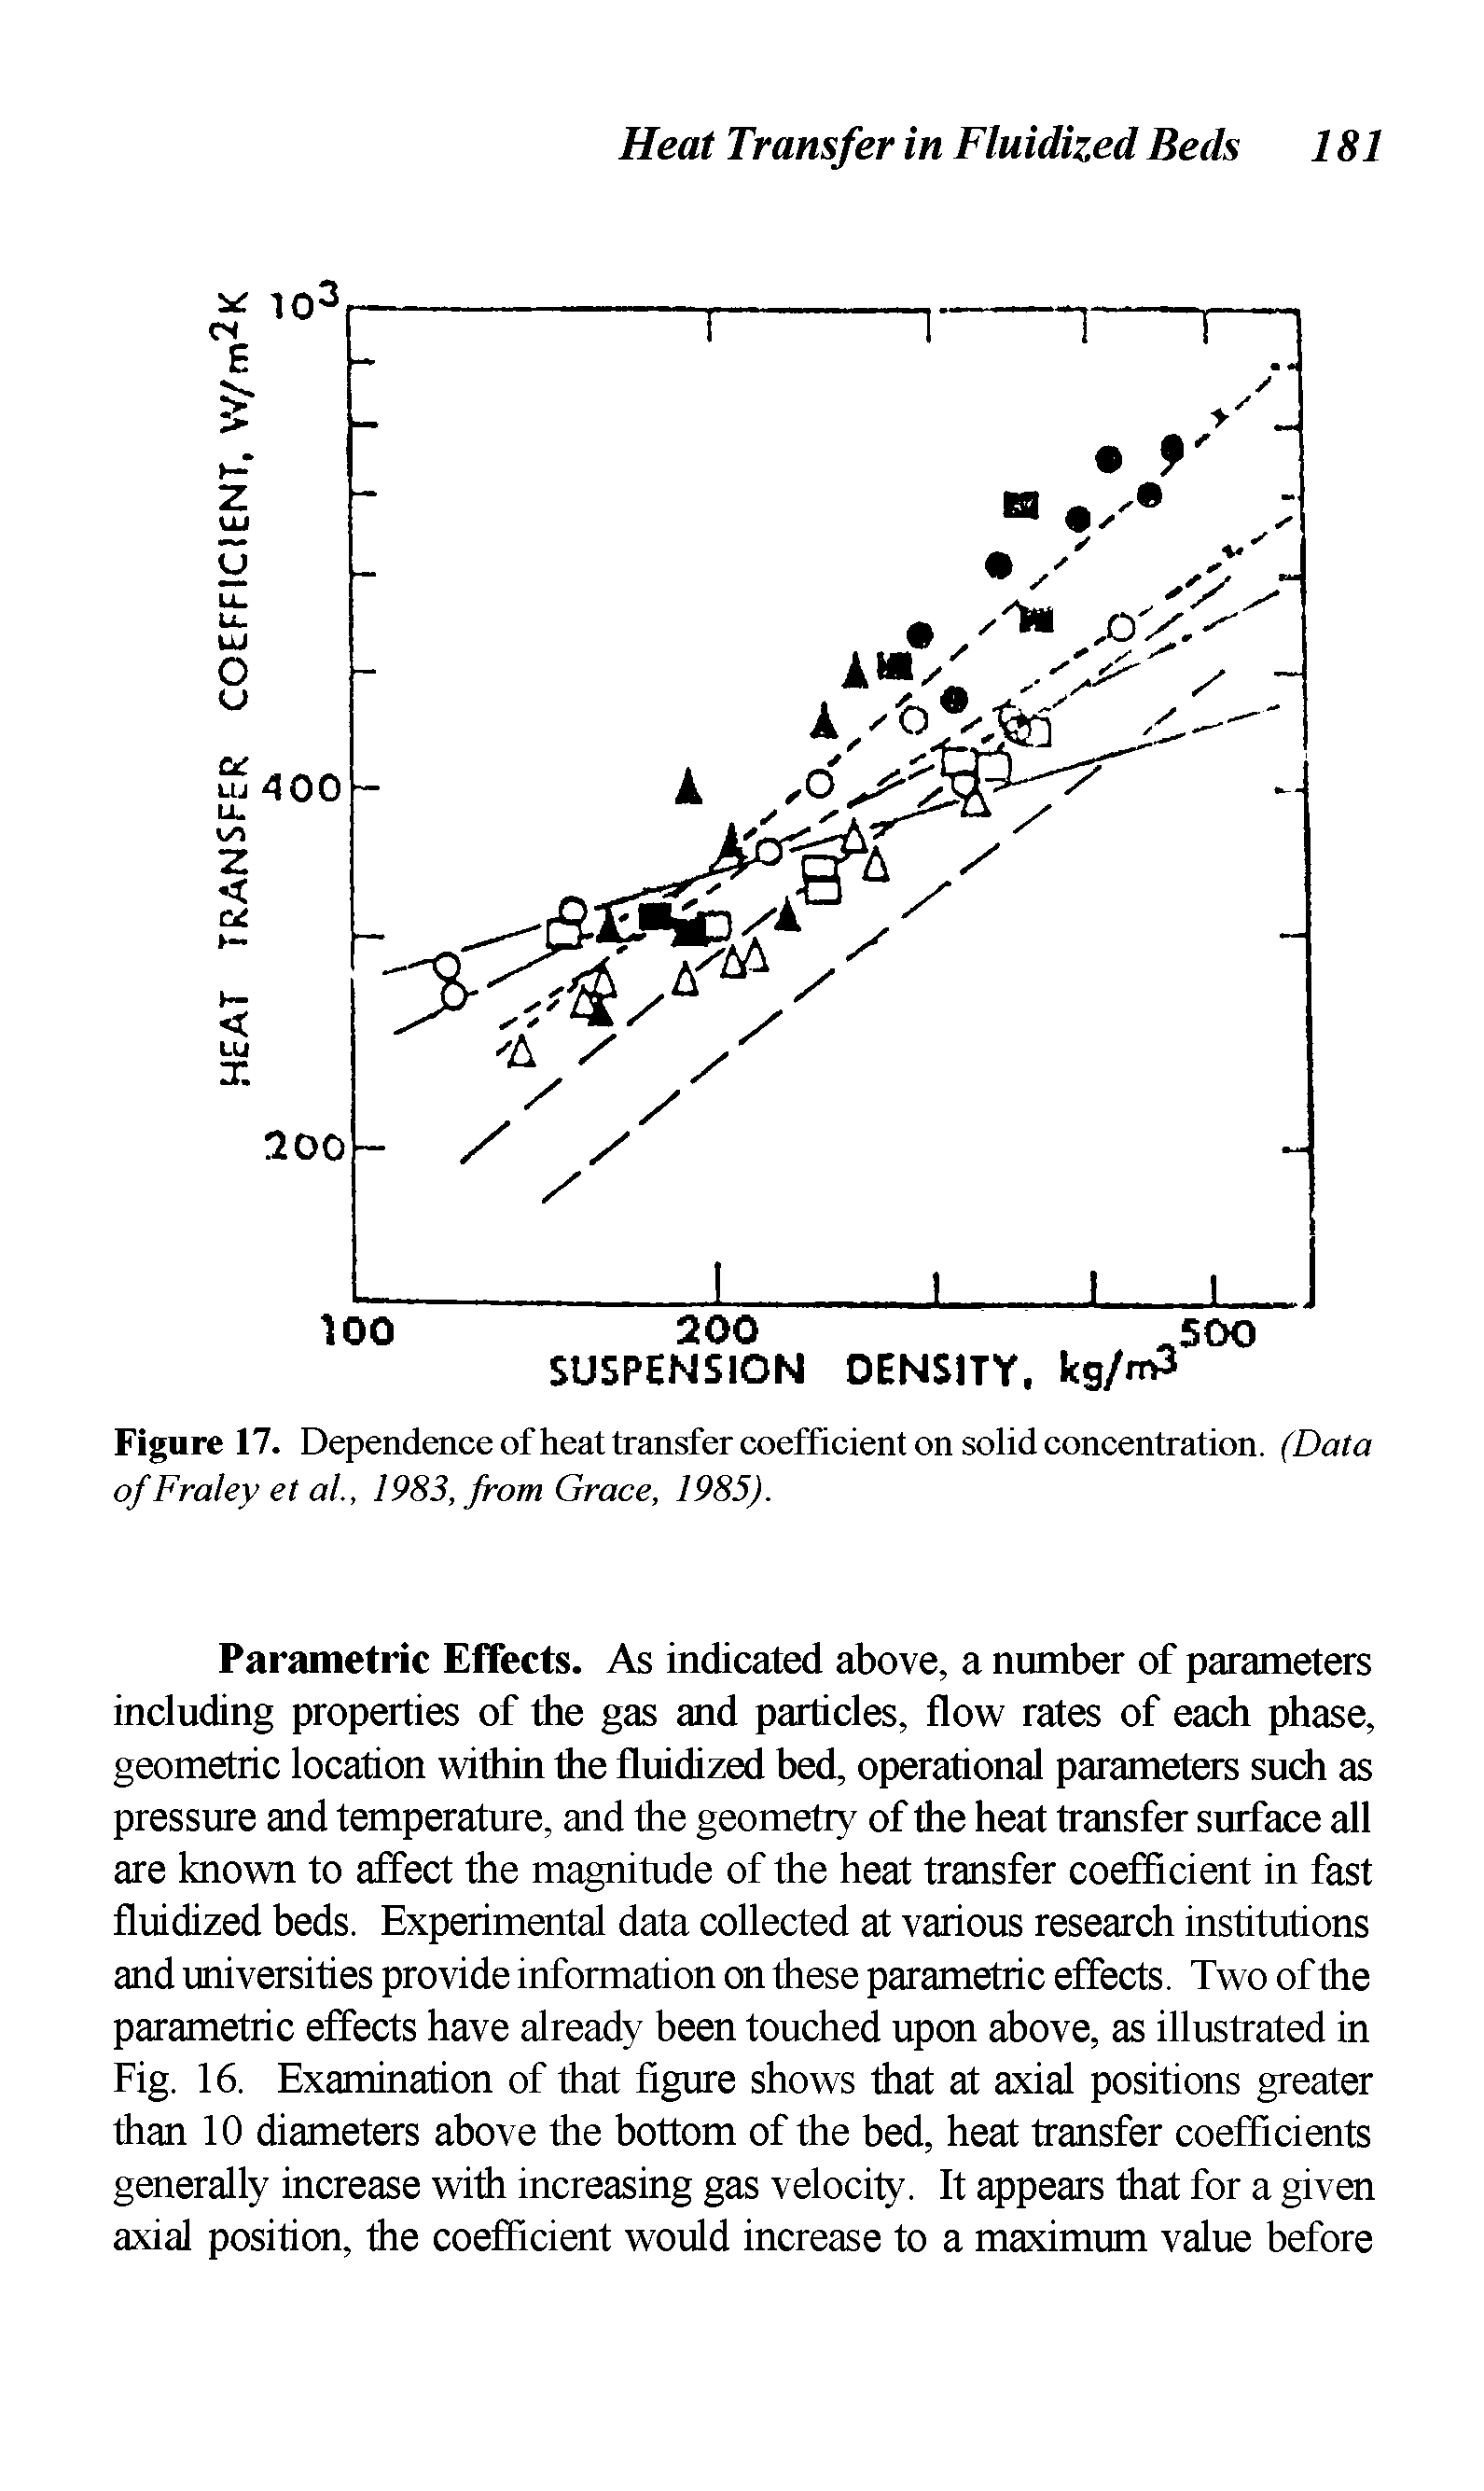 Figure 17. Dependence of heat transfer coefficient on solid concentration. (Data of Fraley et al., 1983, from Grace, 1985).